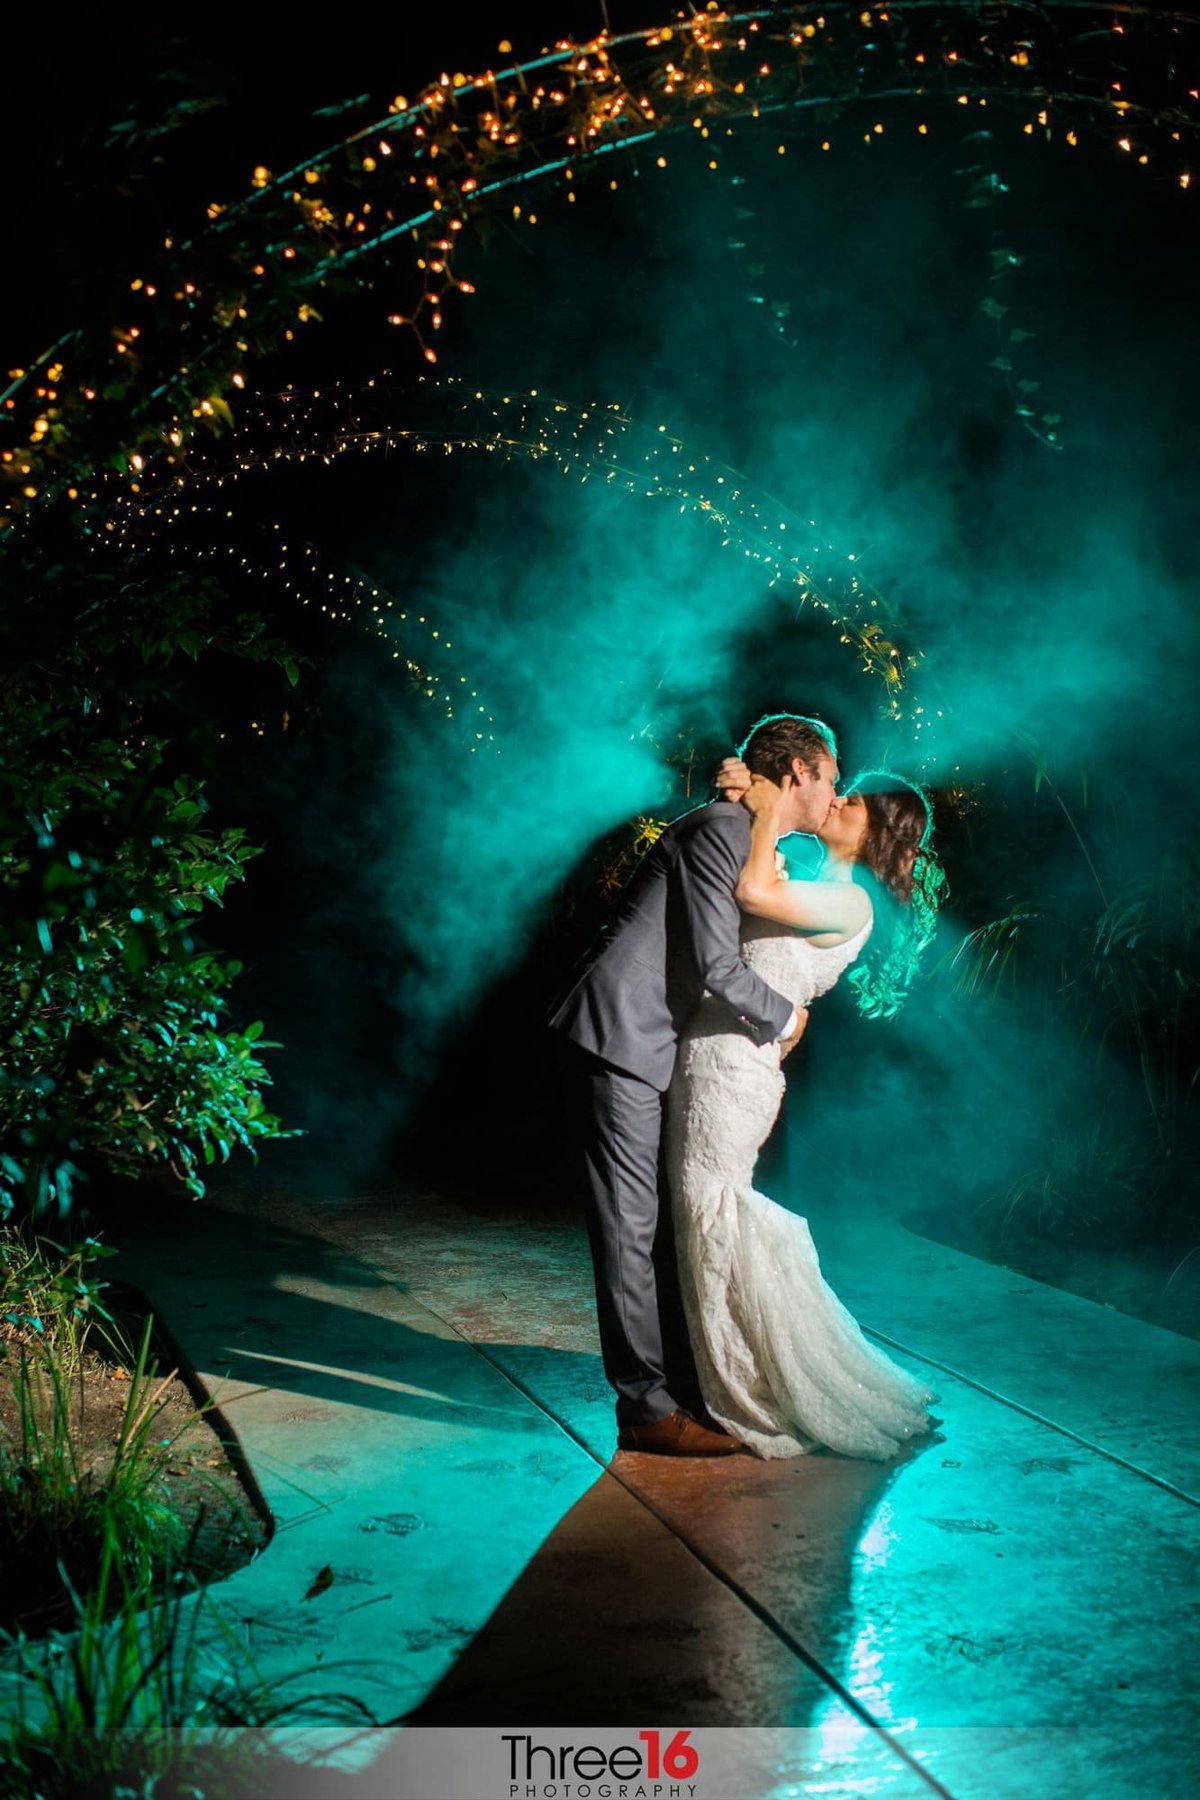 Bride and Groom share a romantic night kiss under the gazebo with green mist behind them